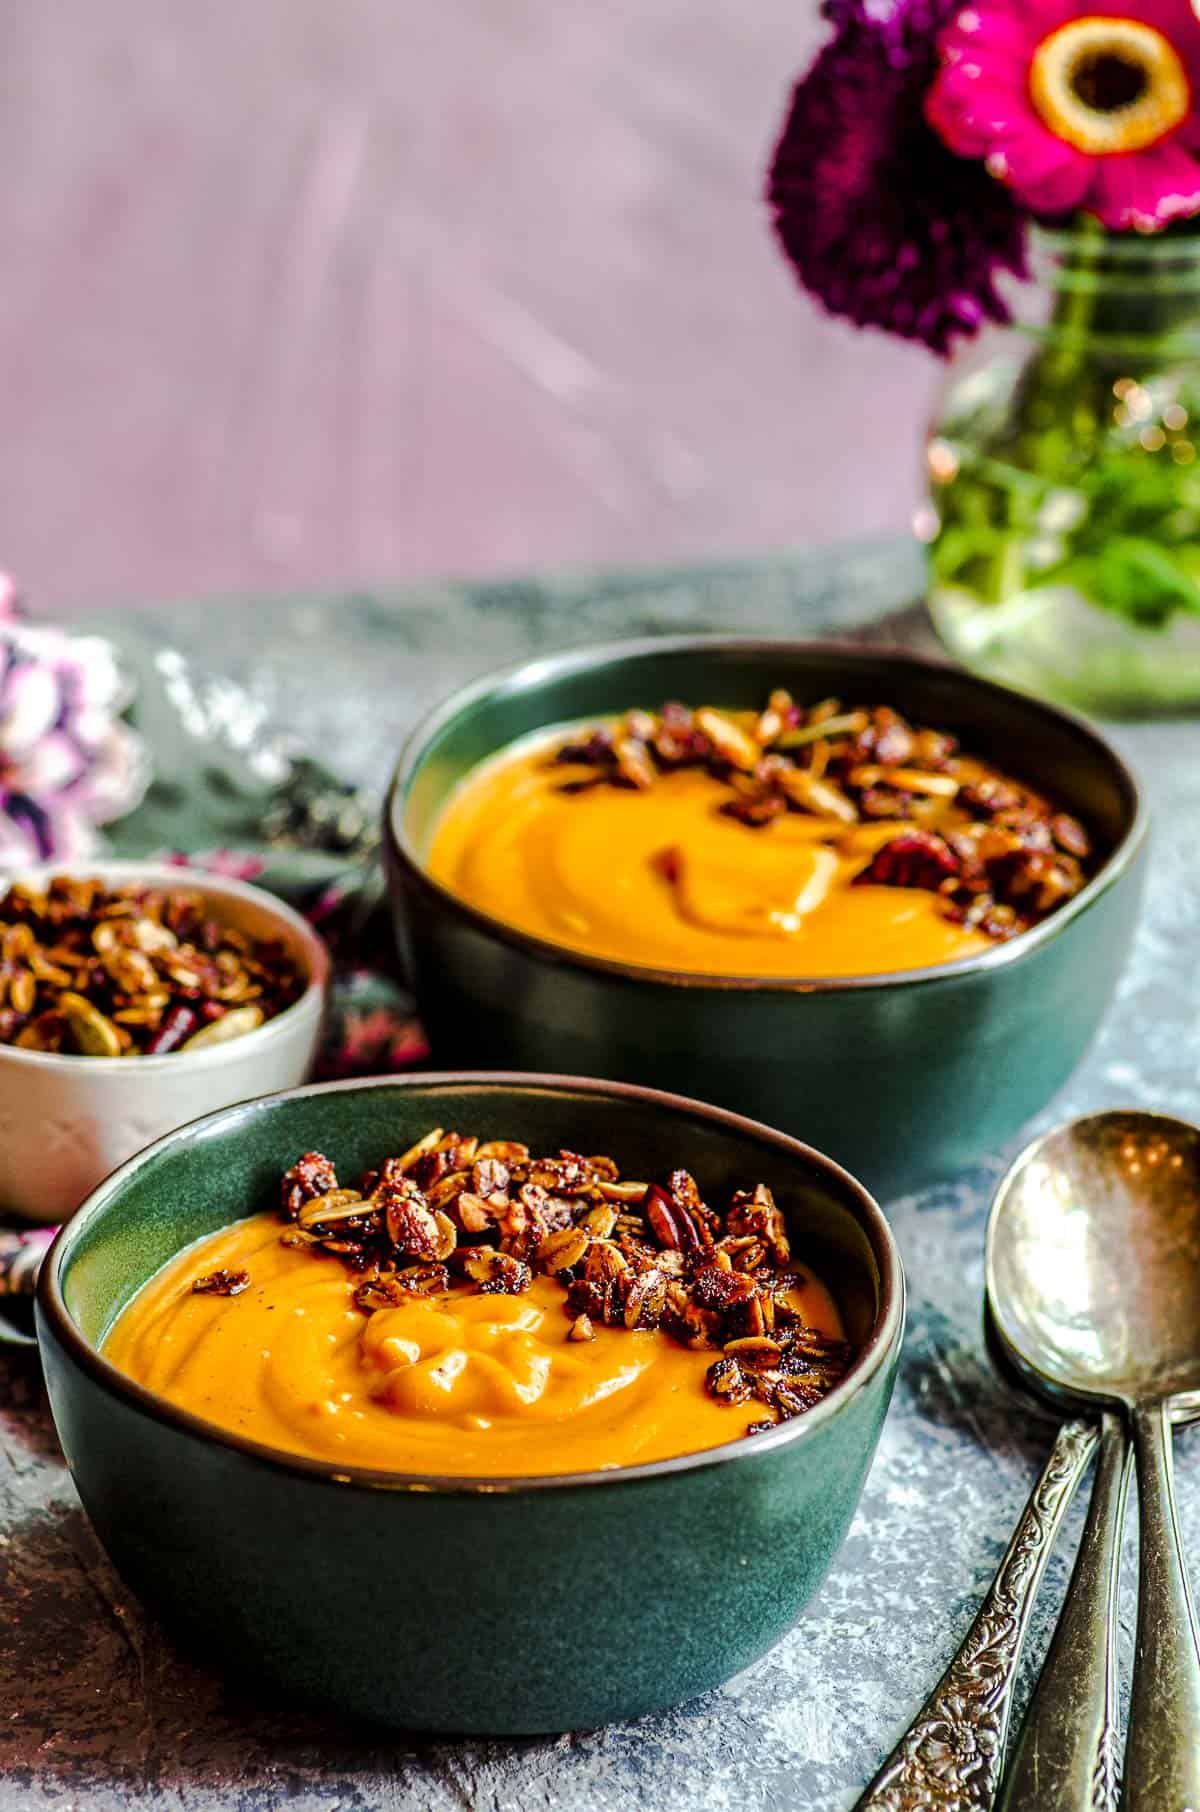 A tilted view of two blue bowls of carrot soup